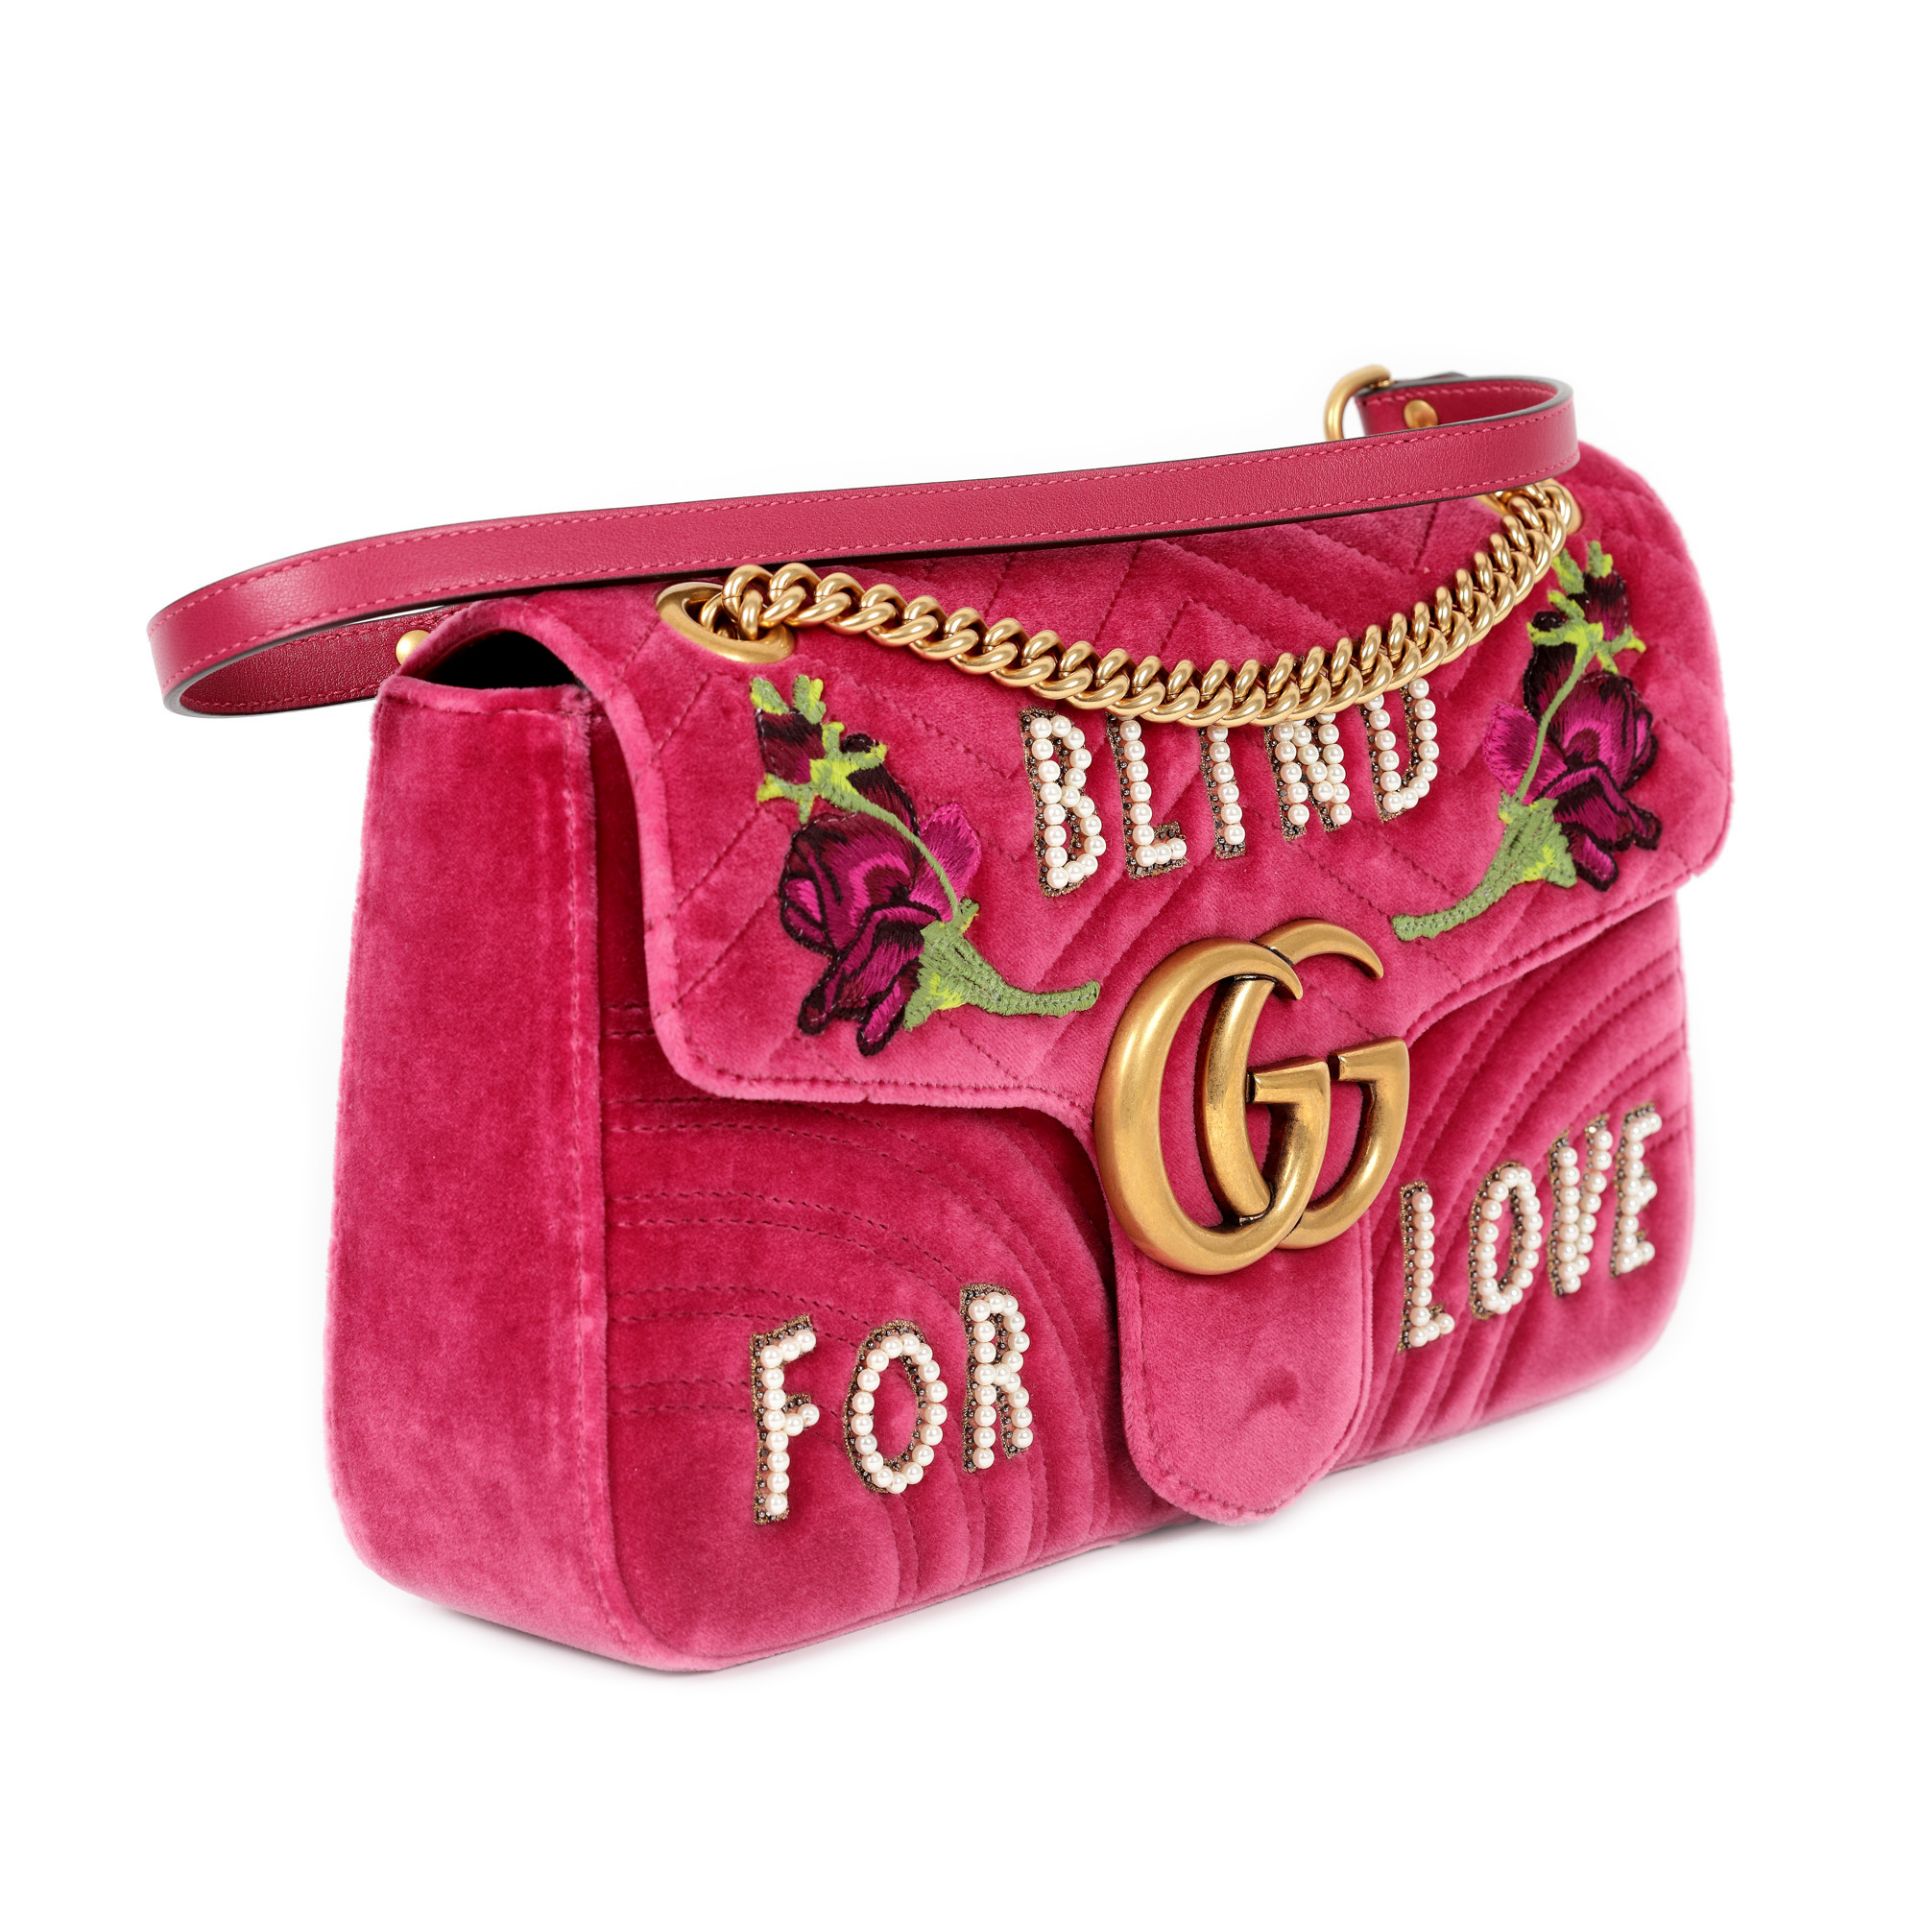 "Marmont Blind for Love" - Gucci bag, velvet, pink, decorated with flower embroidery - Image 2 of 3